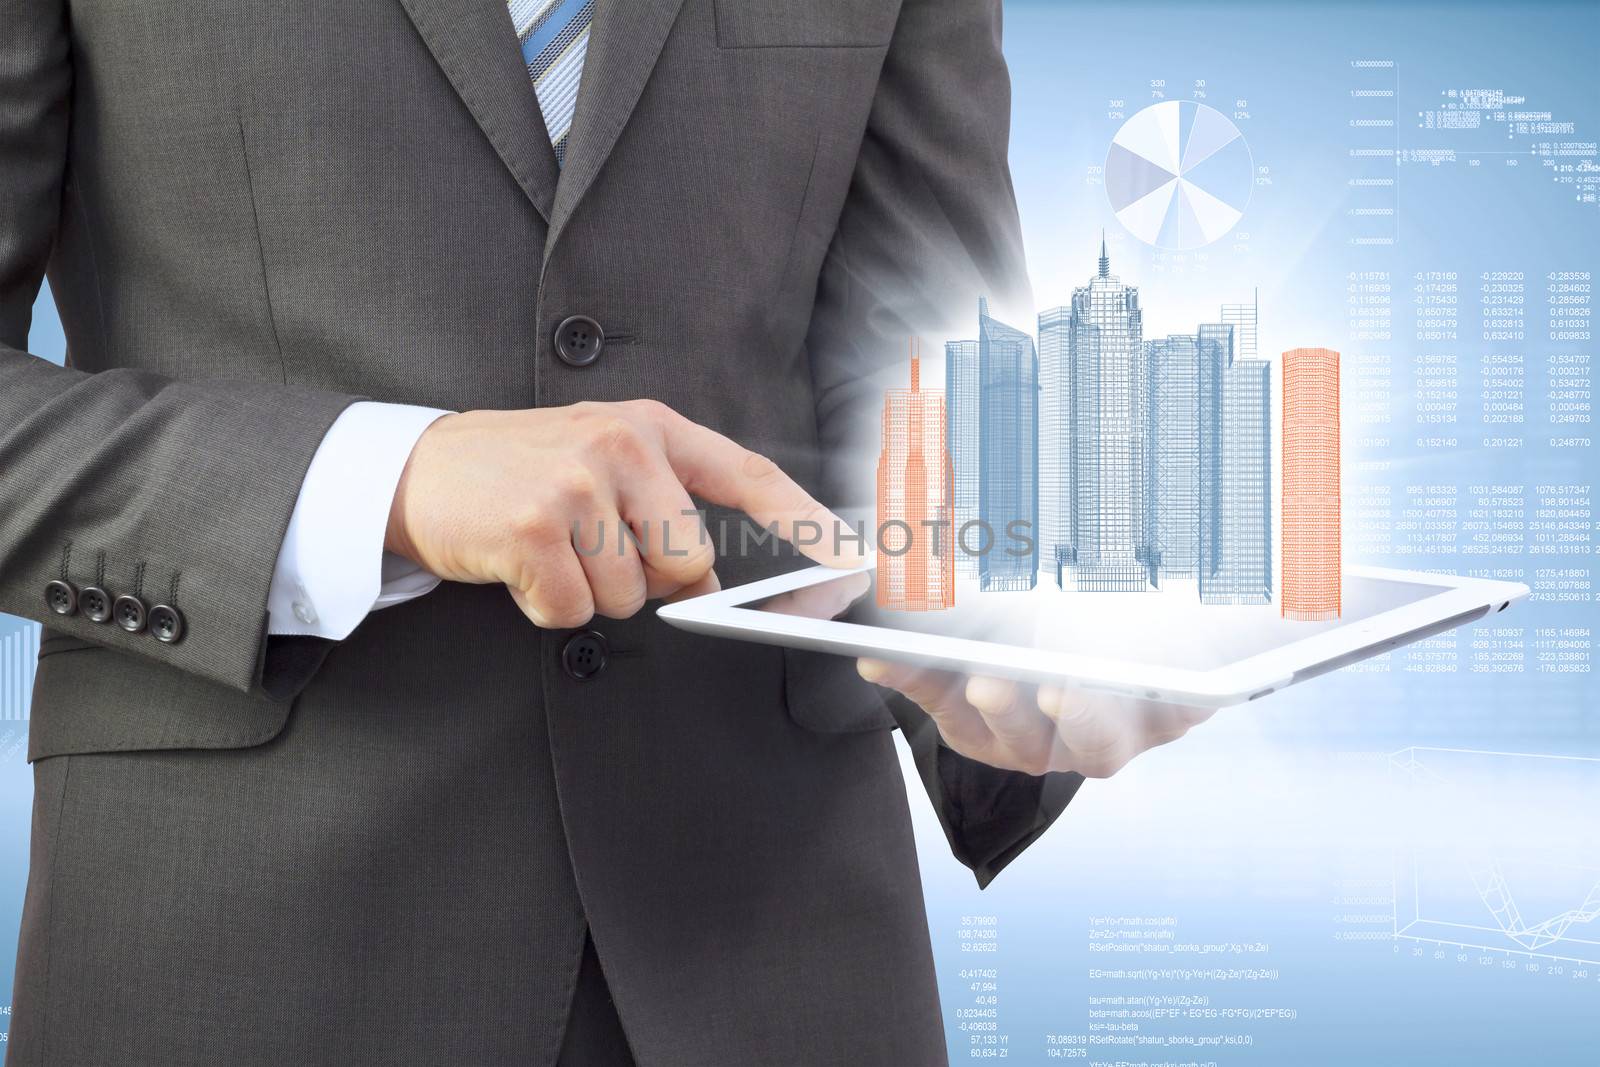 Businessman in a suit holding a tablet computer. On the screen of the tablet are skyscrapers